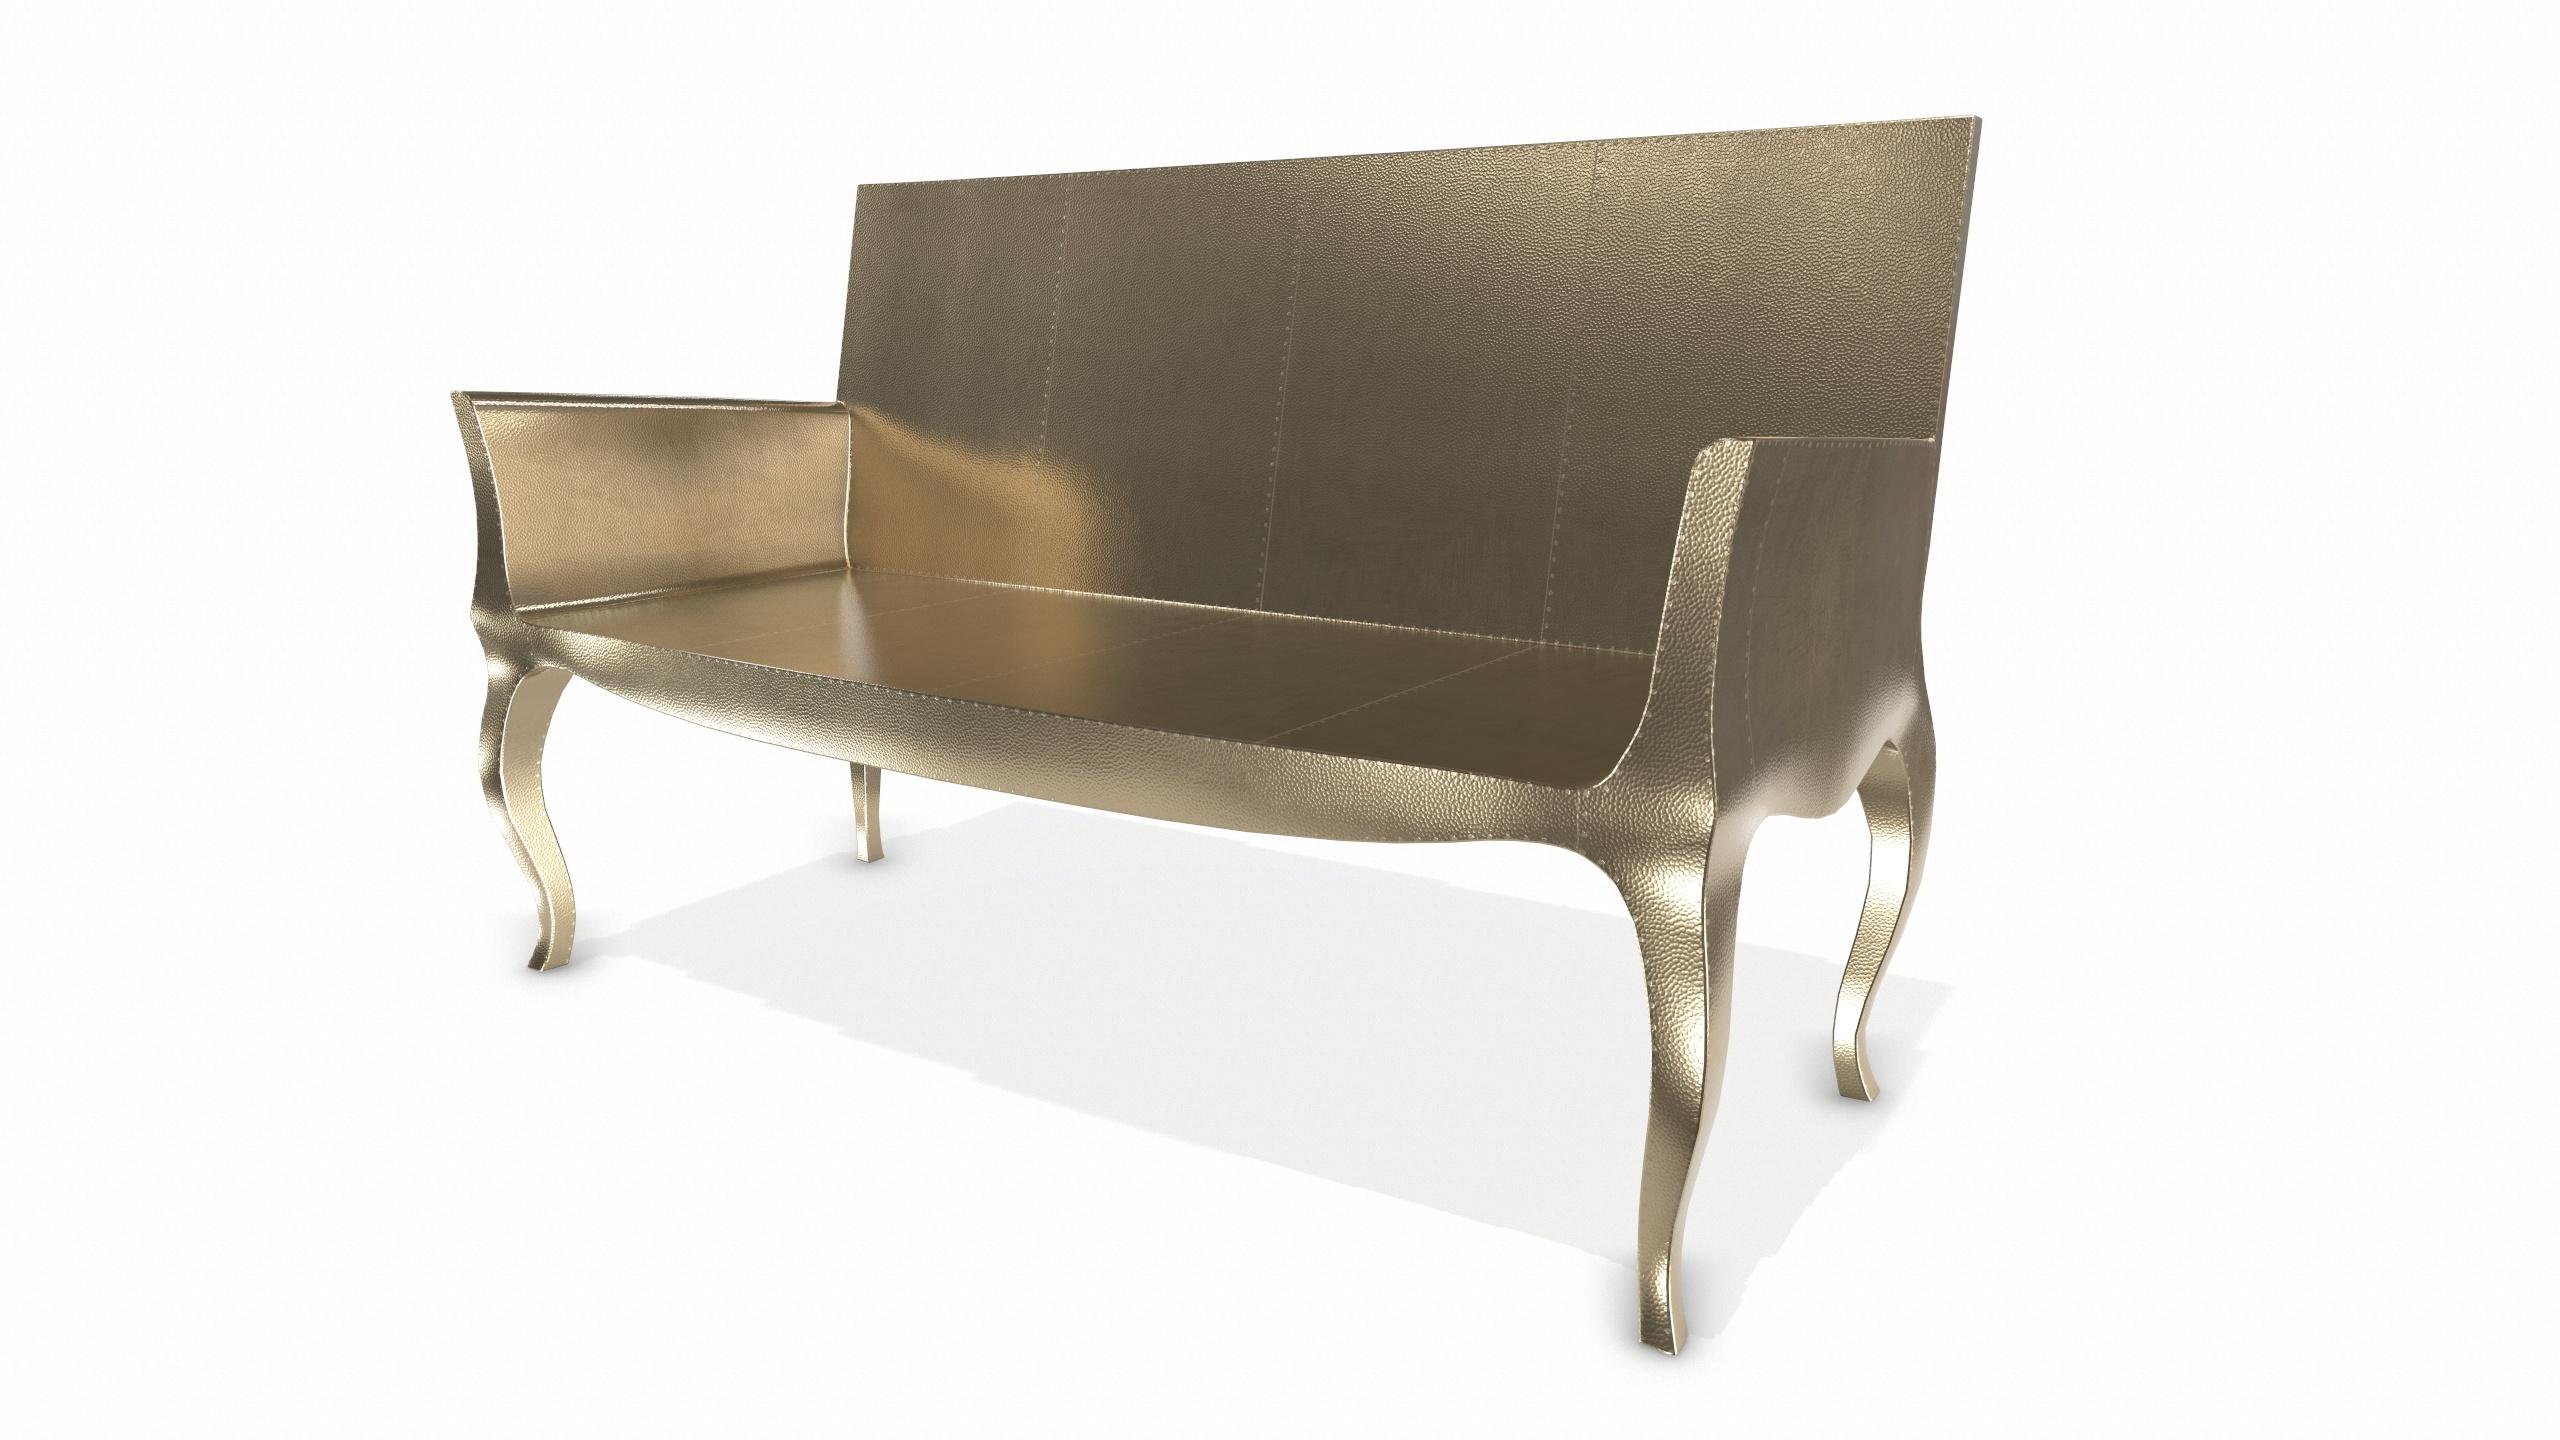 American Louise Settee Art Deco Chaise Longues in Mid. Hammered Brass by Paul Mathieu For Sale